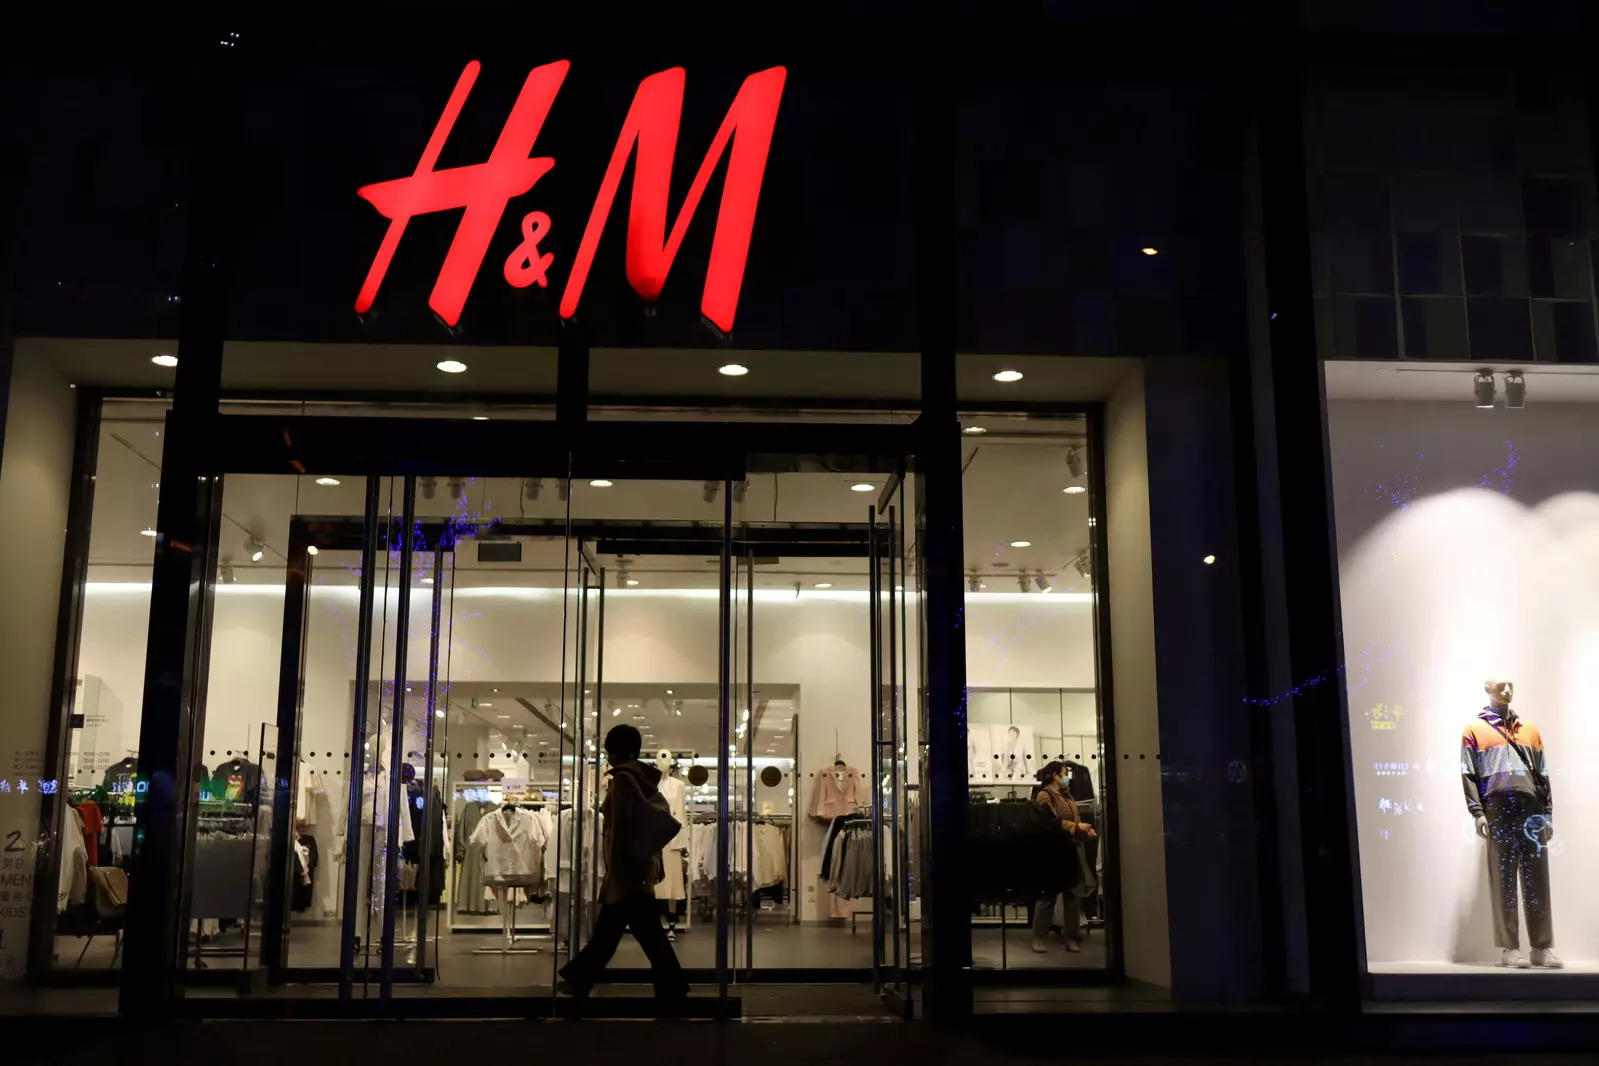 H&M, Lululemon back $250 million Fashion Climate Fund to decarbonise supply chain